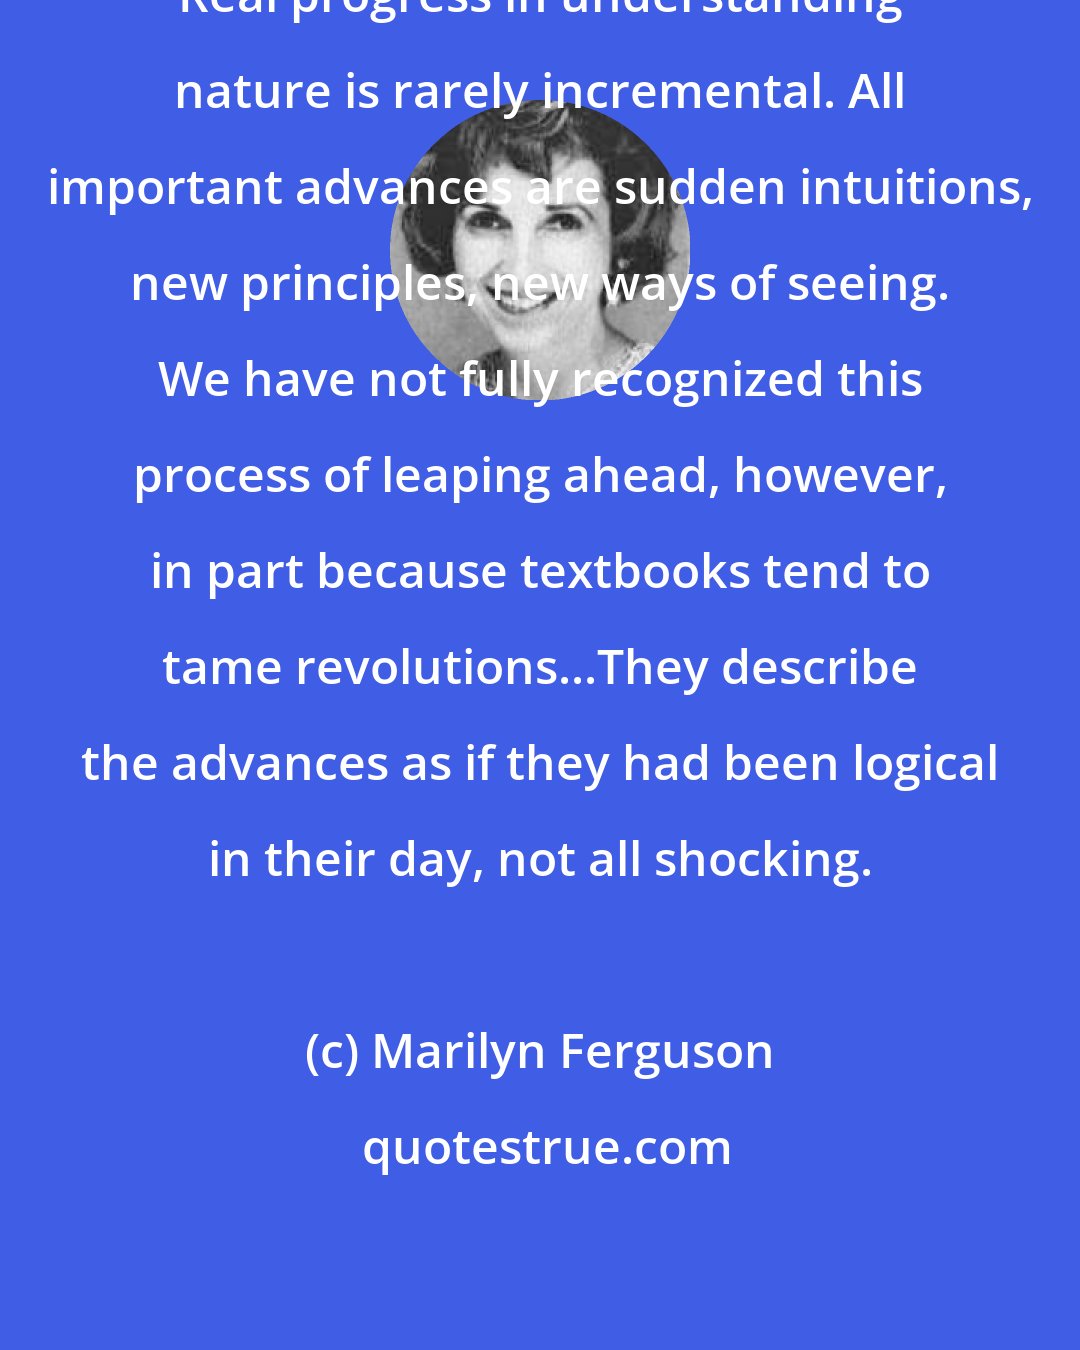 Marilyn Ferguson: Real progress in understanding nature is rarely incremental. All important advances are sudden intuitions, new principles, new ways of seeing. We have not fully recognized this process of leaping ahead, however, in part because textbooks tend to tame revolutions...They describe the advances as if they had been logical in their day, not all shocking.